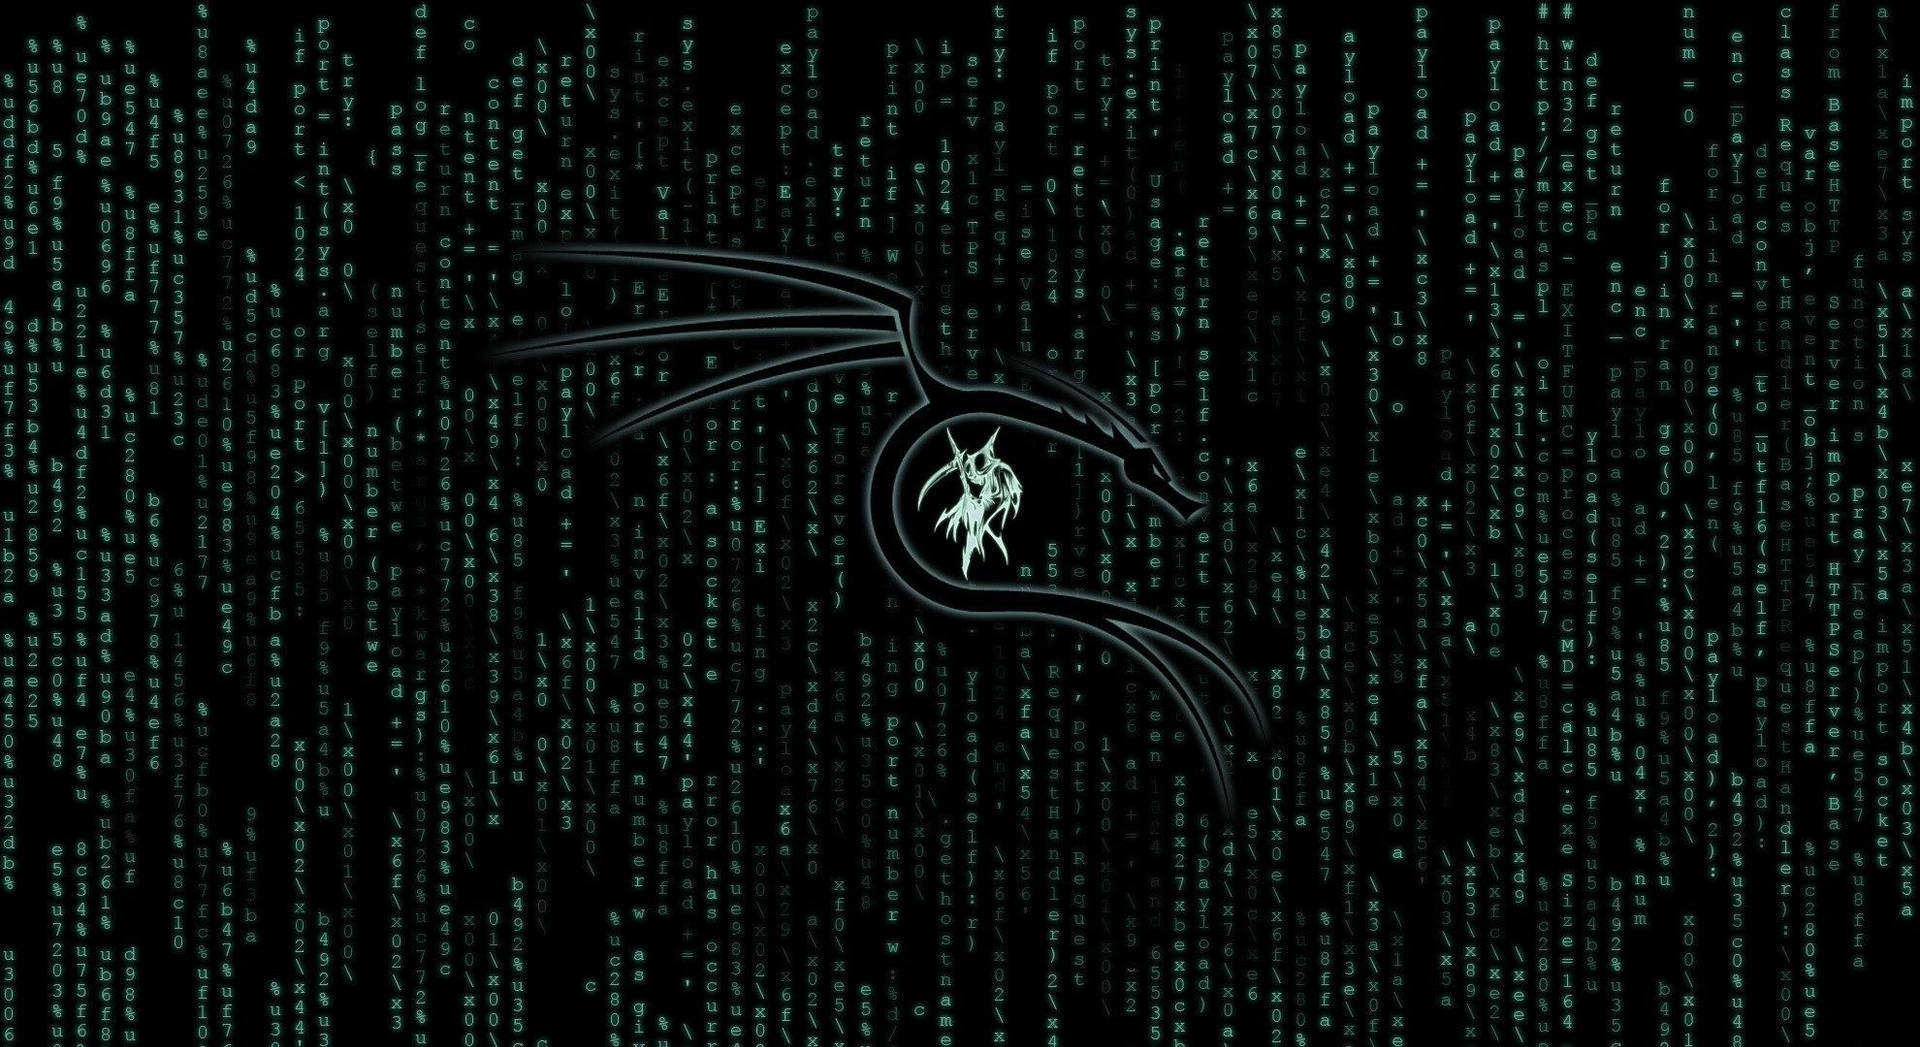 Codes Of Kali Linux Background